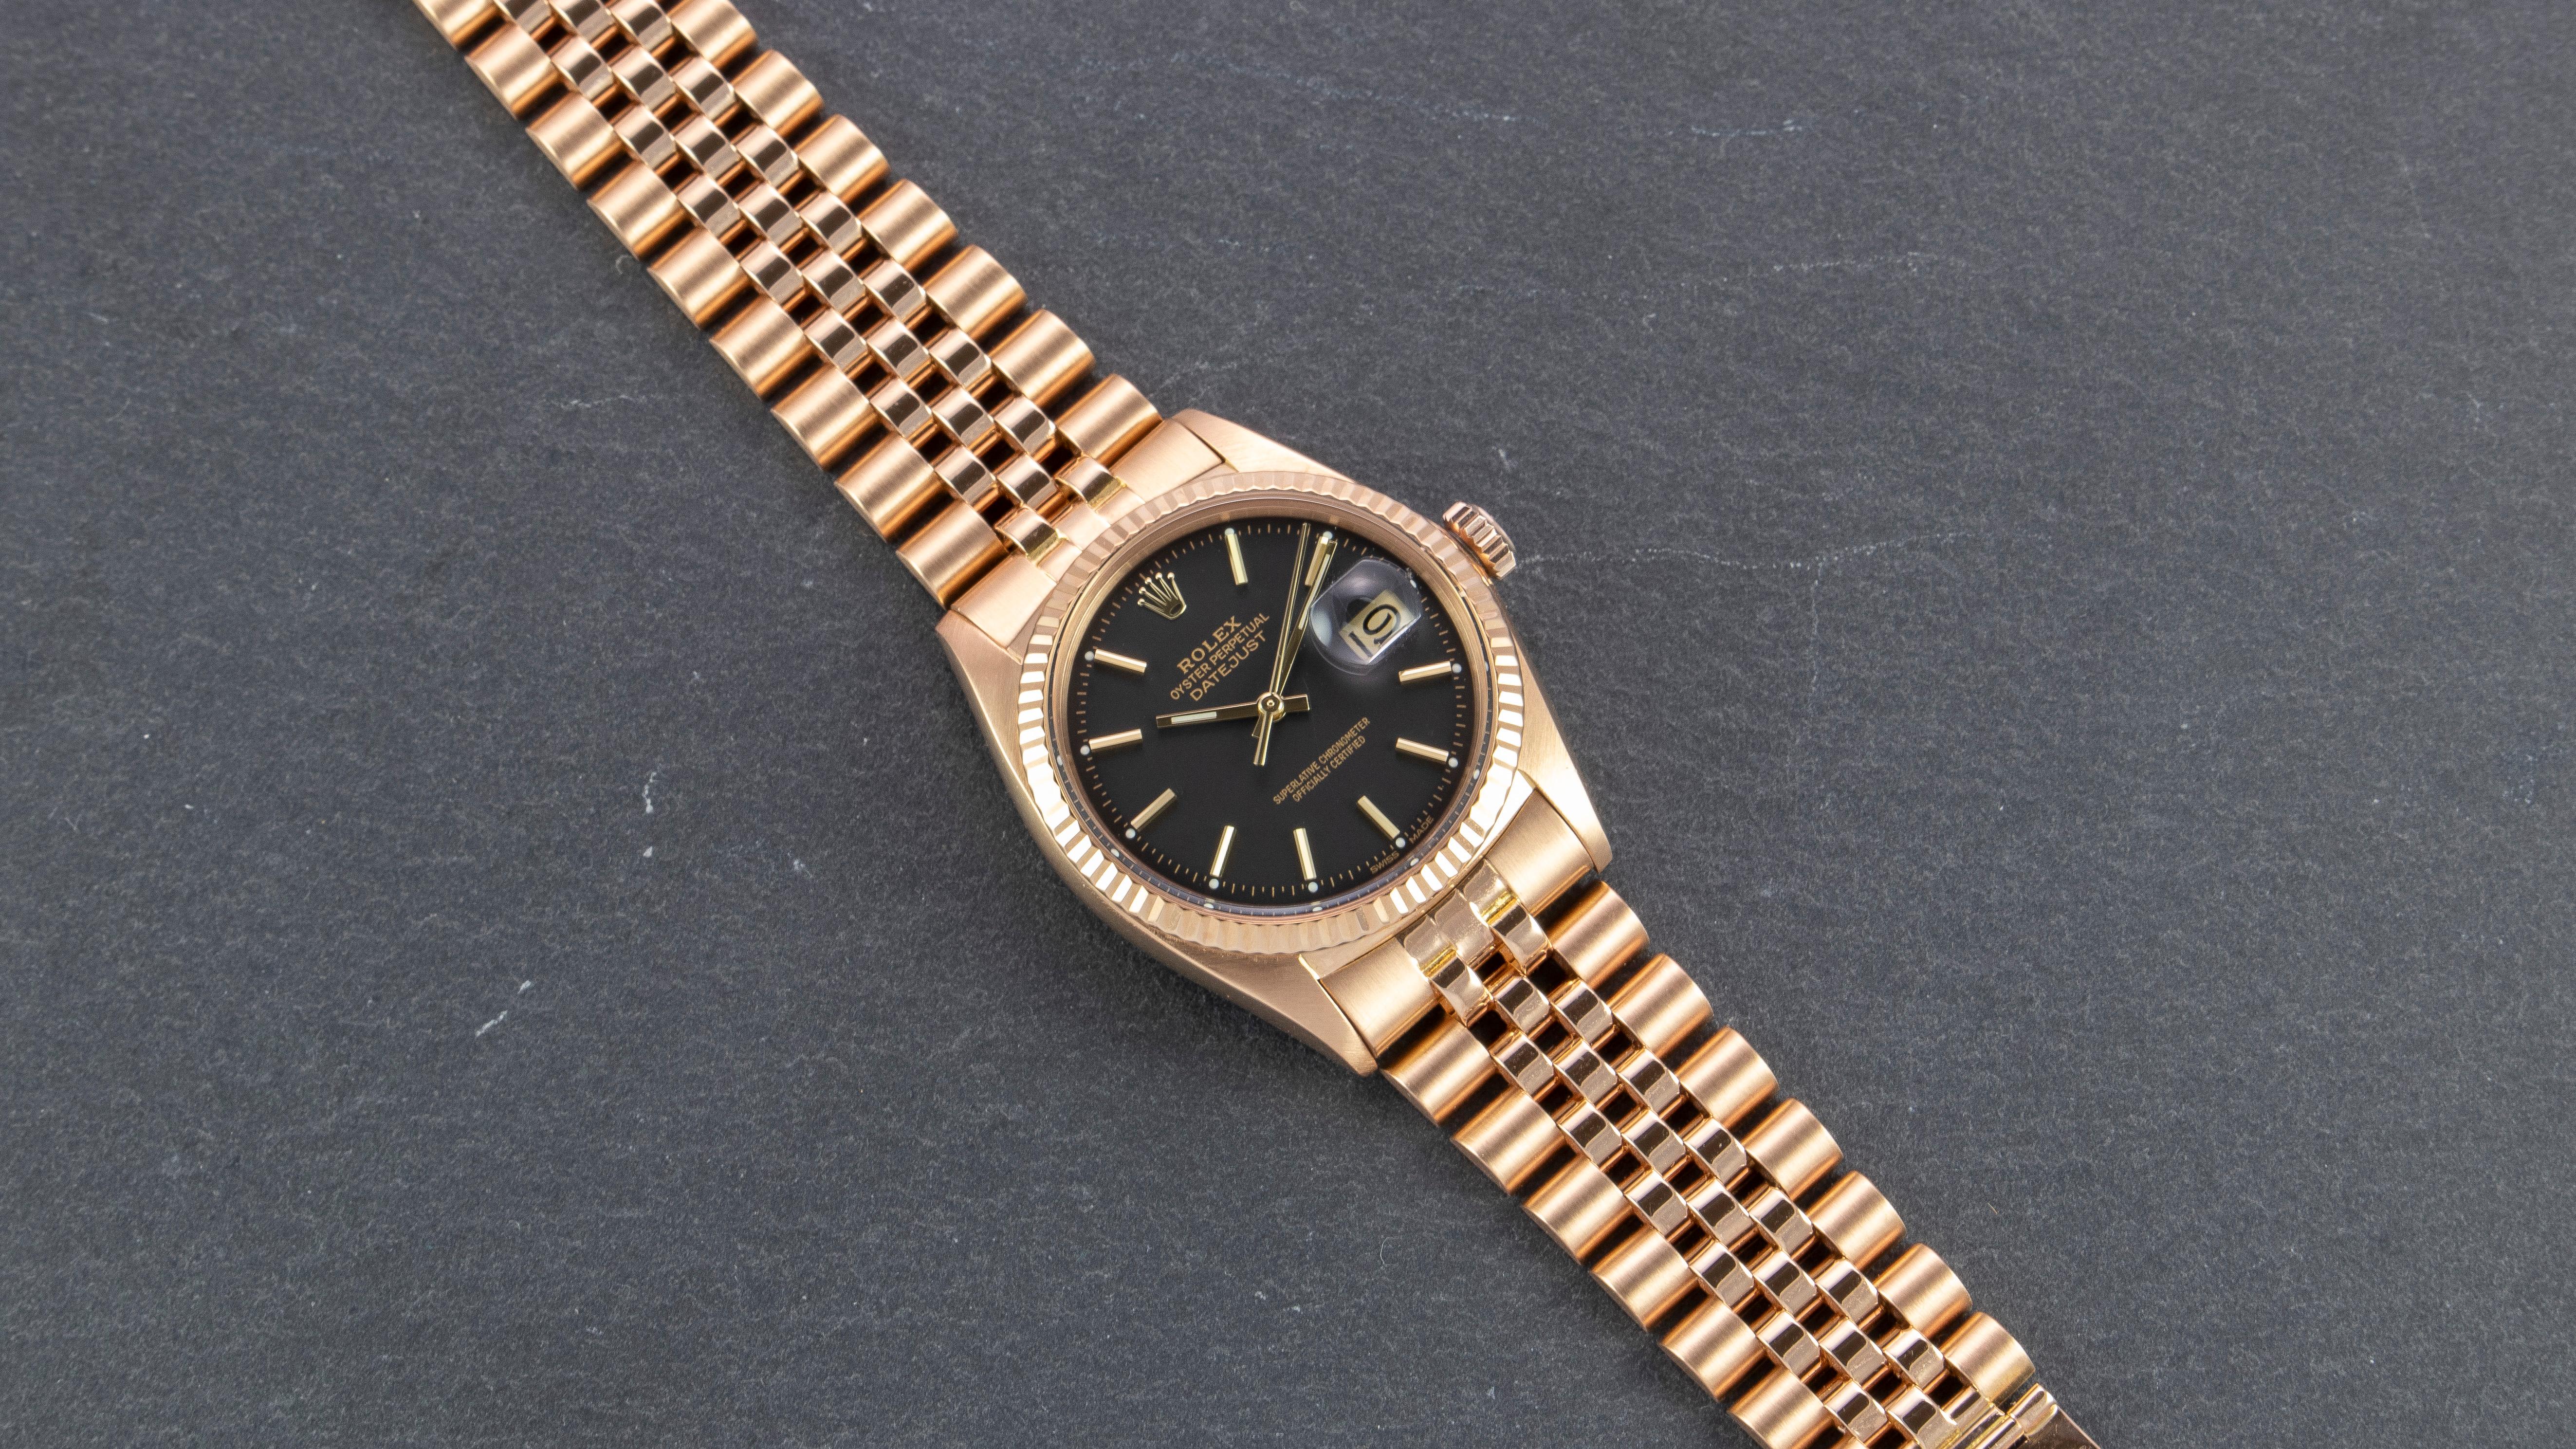 Pretty in Pink.

Rolex 18K Rose Gold Oyster Perpetual Datejust with Black Dial

The Rolex Oyster Perpetual Datejust is timeless. It has a classic look, style and design. This Rolex 36mm 18K rose gold Datejust watch (reference 1601) is stunning and